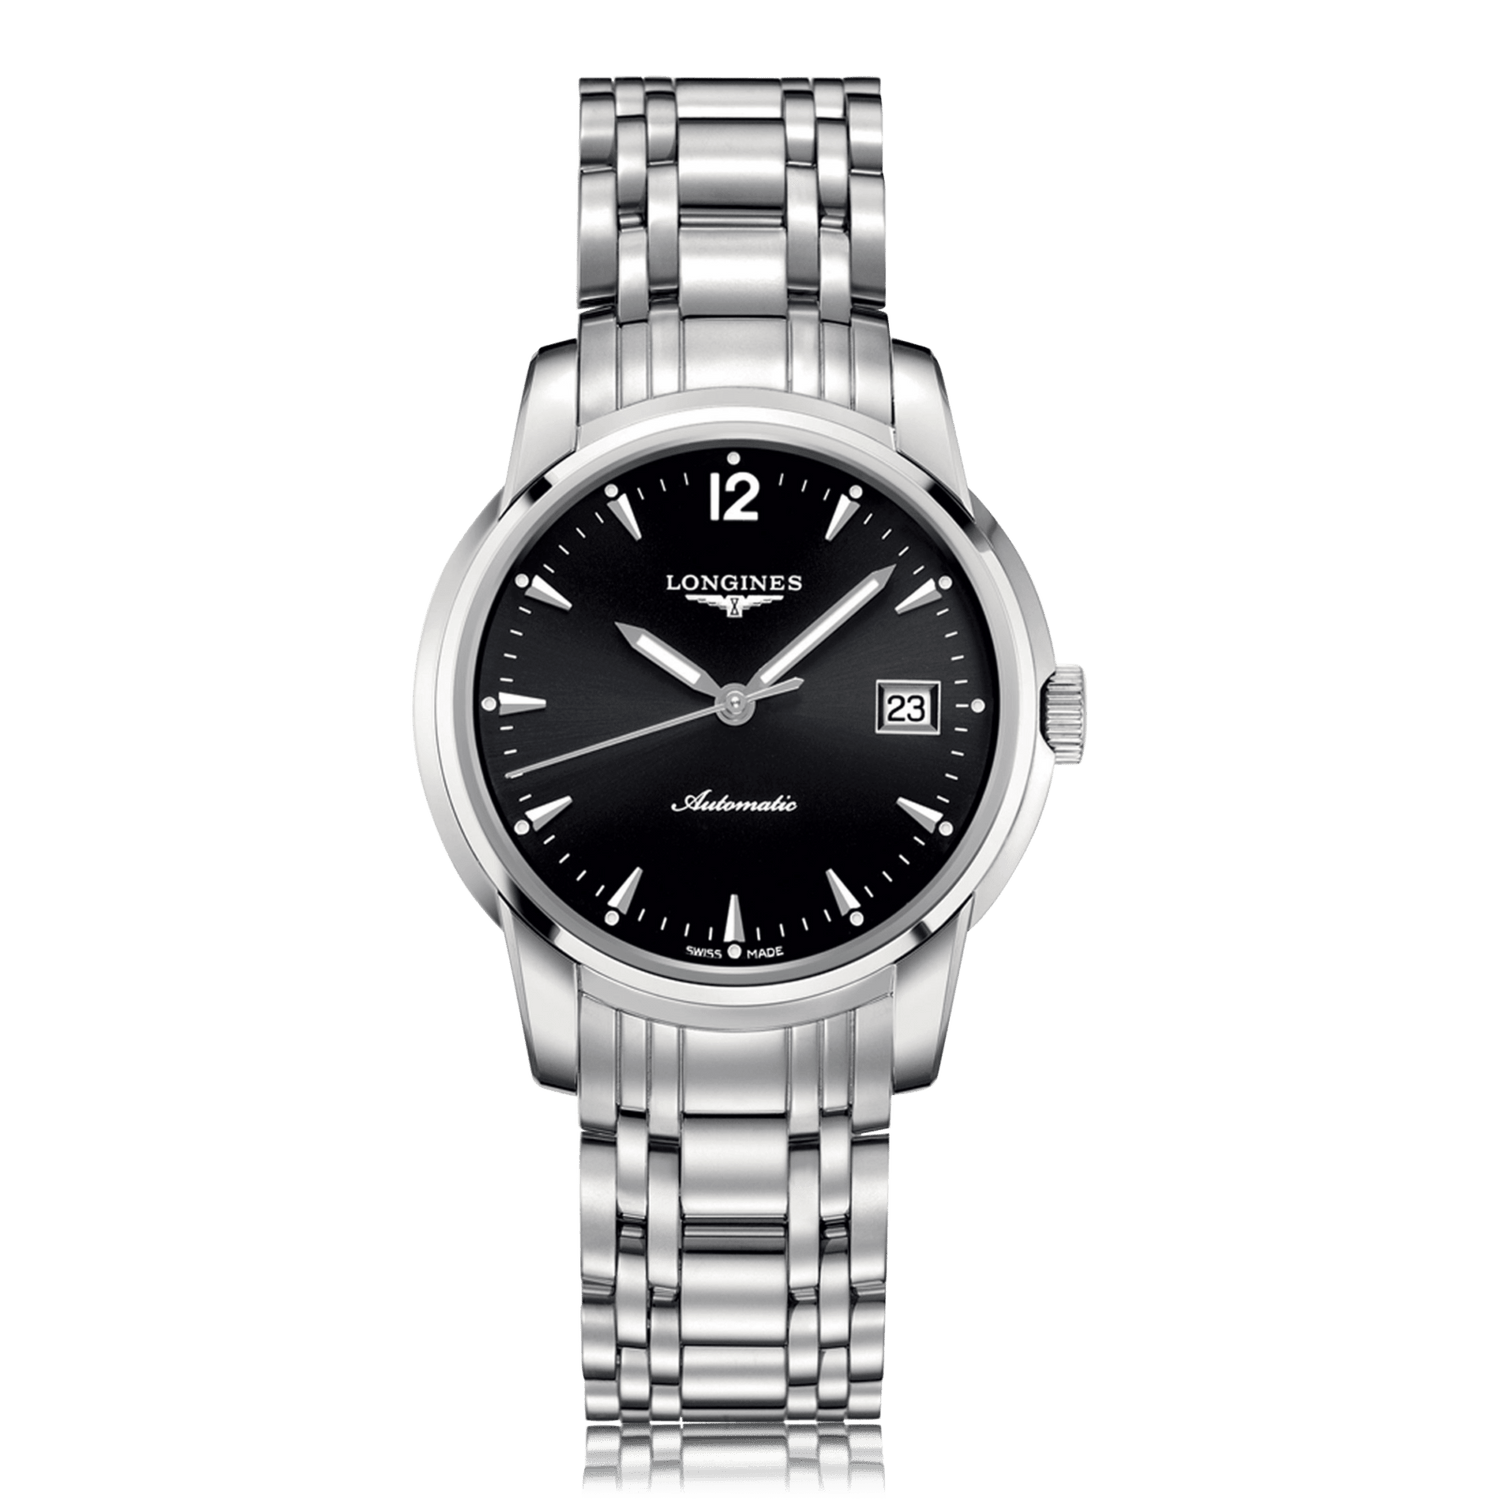 LONGINES Saint-Imier Stainless Steel Automatic Mens Watch L27634526